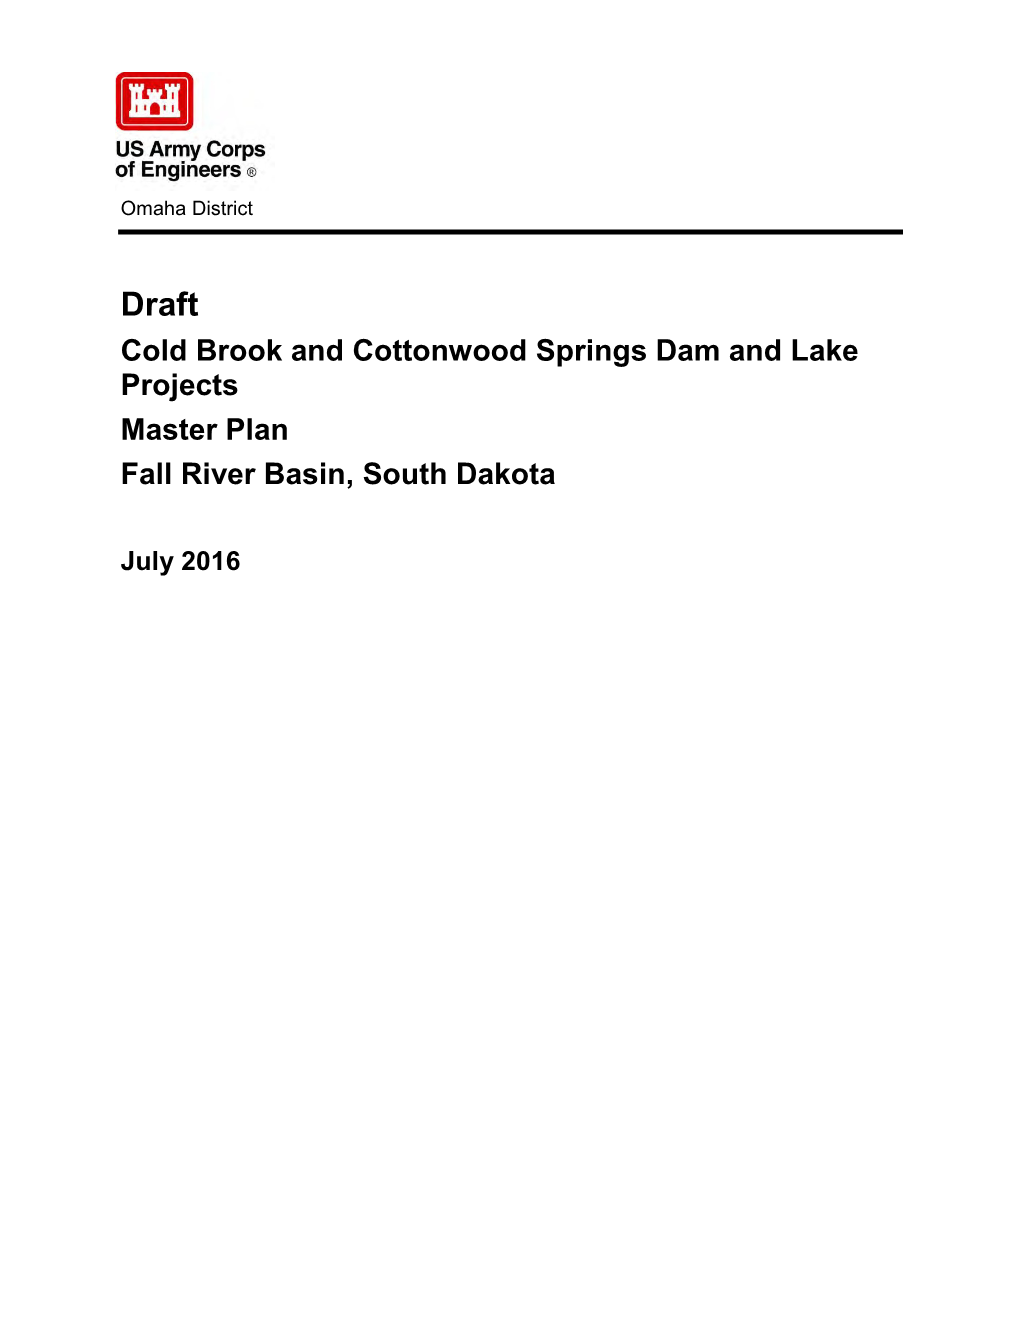 Cold Brook and Cottonwood Springs Dam and Lake Projects Master Plan Fall River Basin, South Dakota